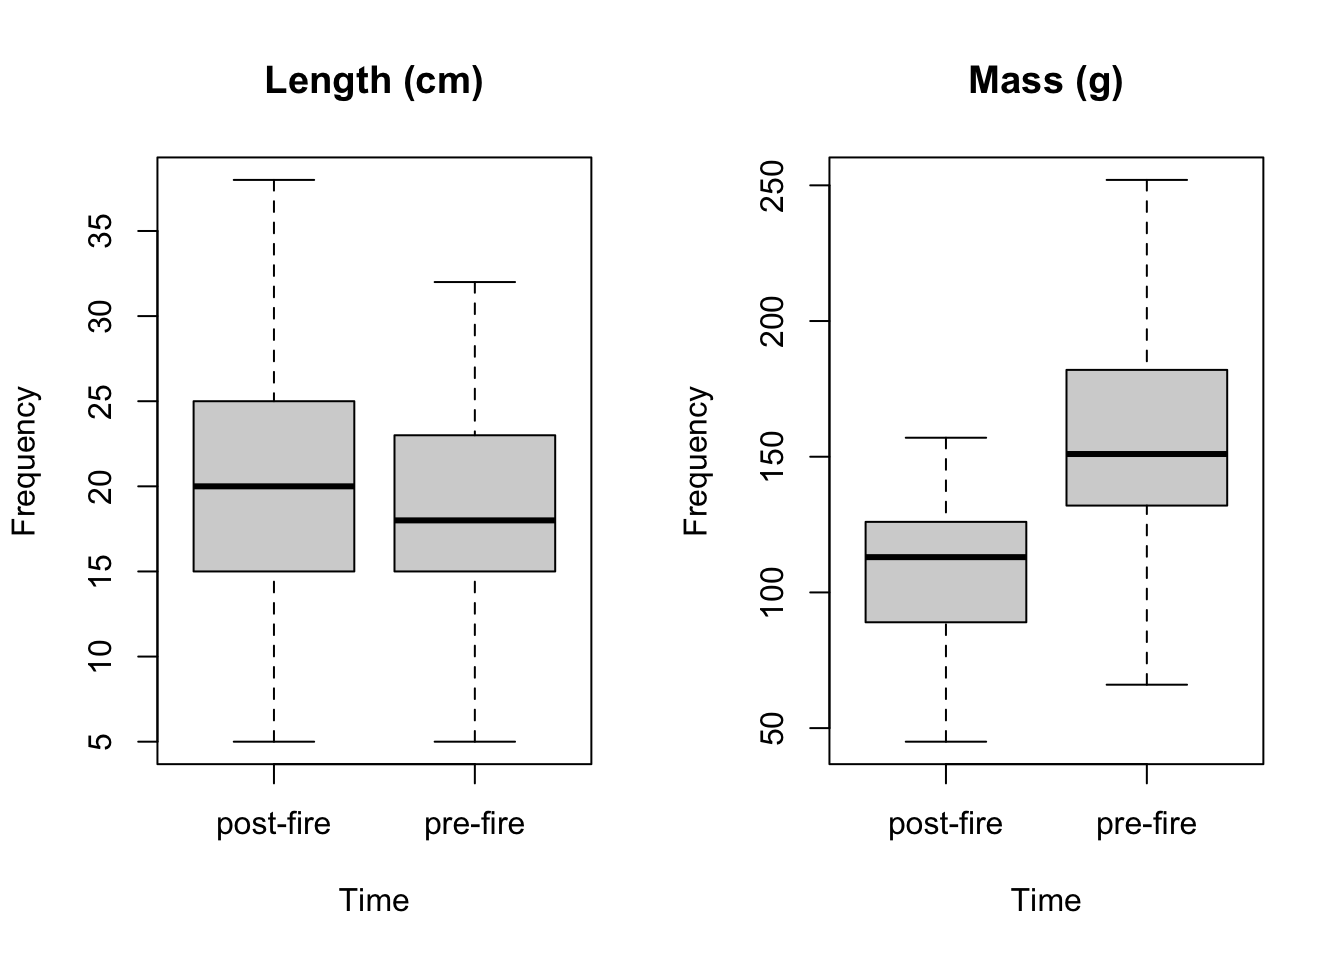 Boxplots for fish length in centimeters and mass in grams pre and post fire.